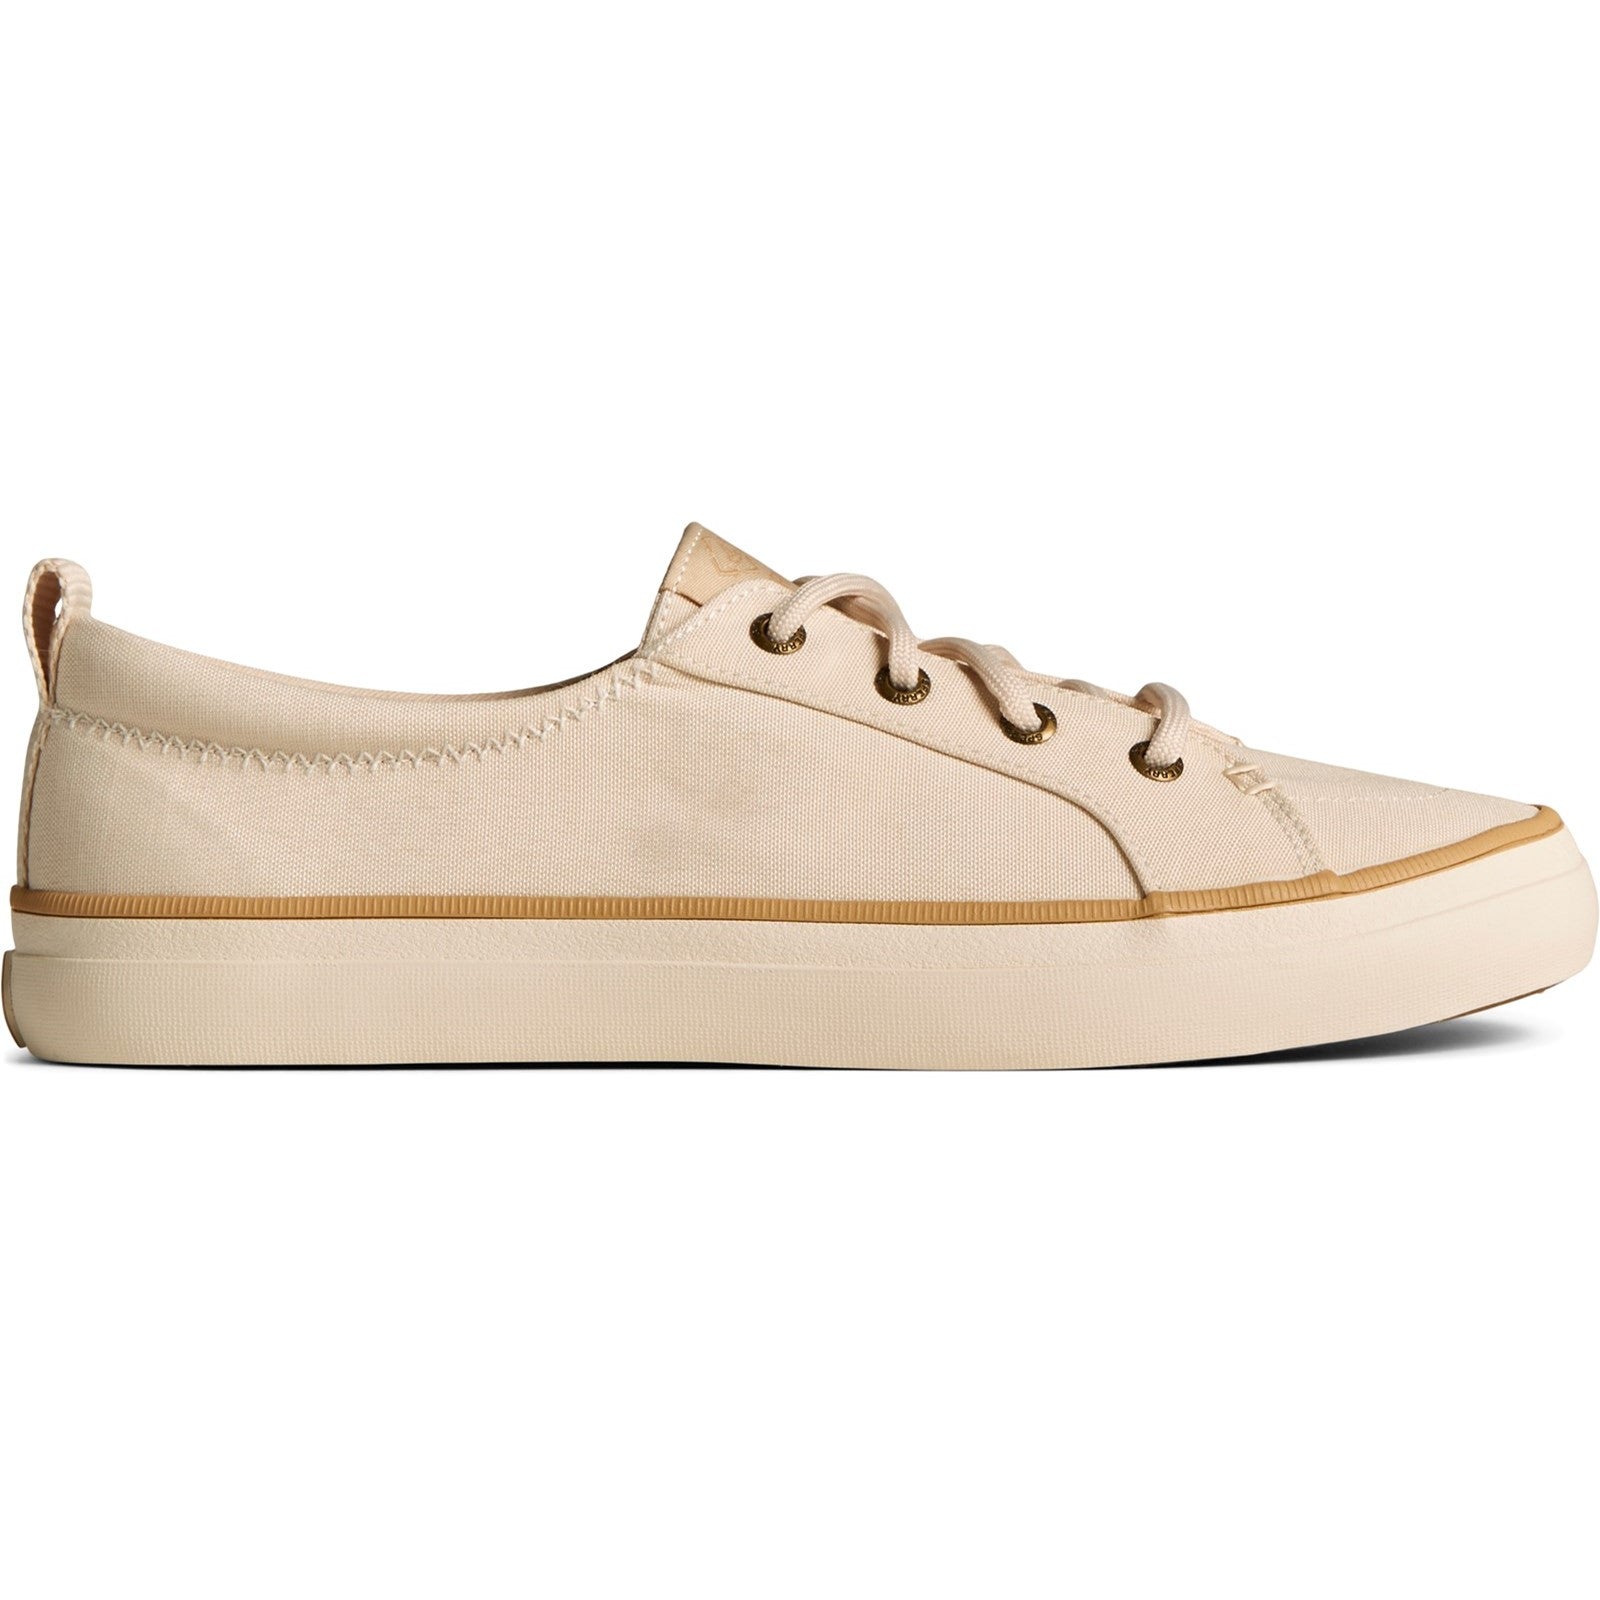 Sperry Womens Crest Vibe Trainers - Cream